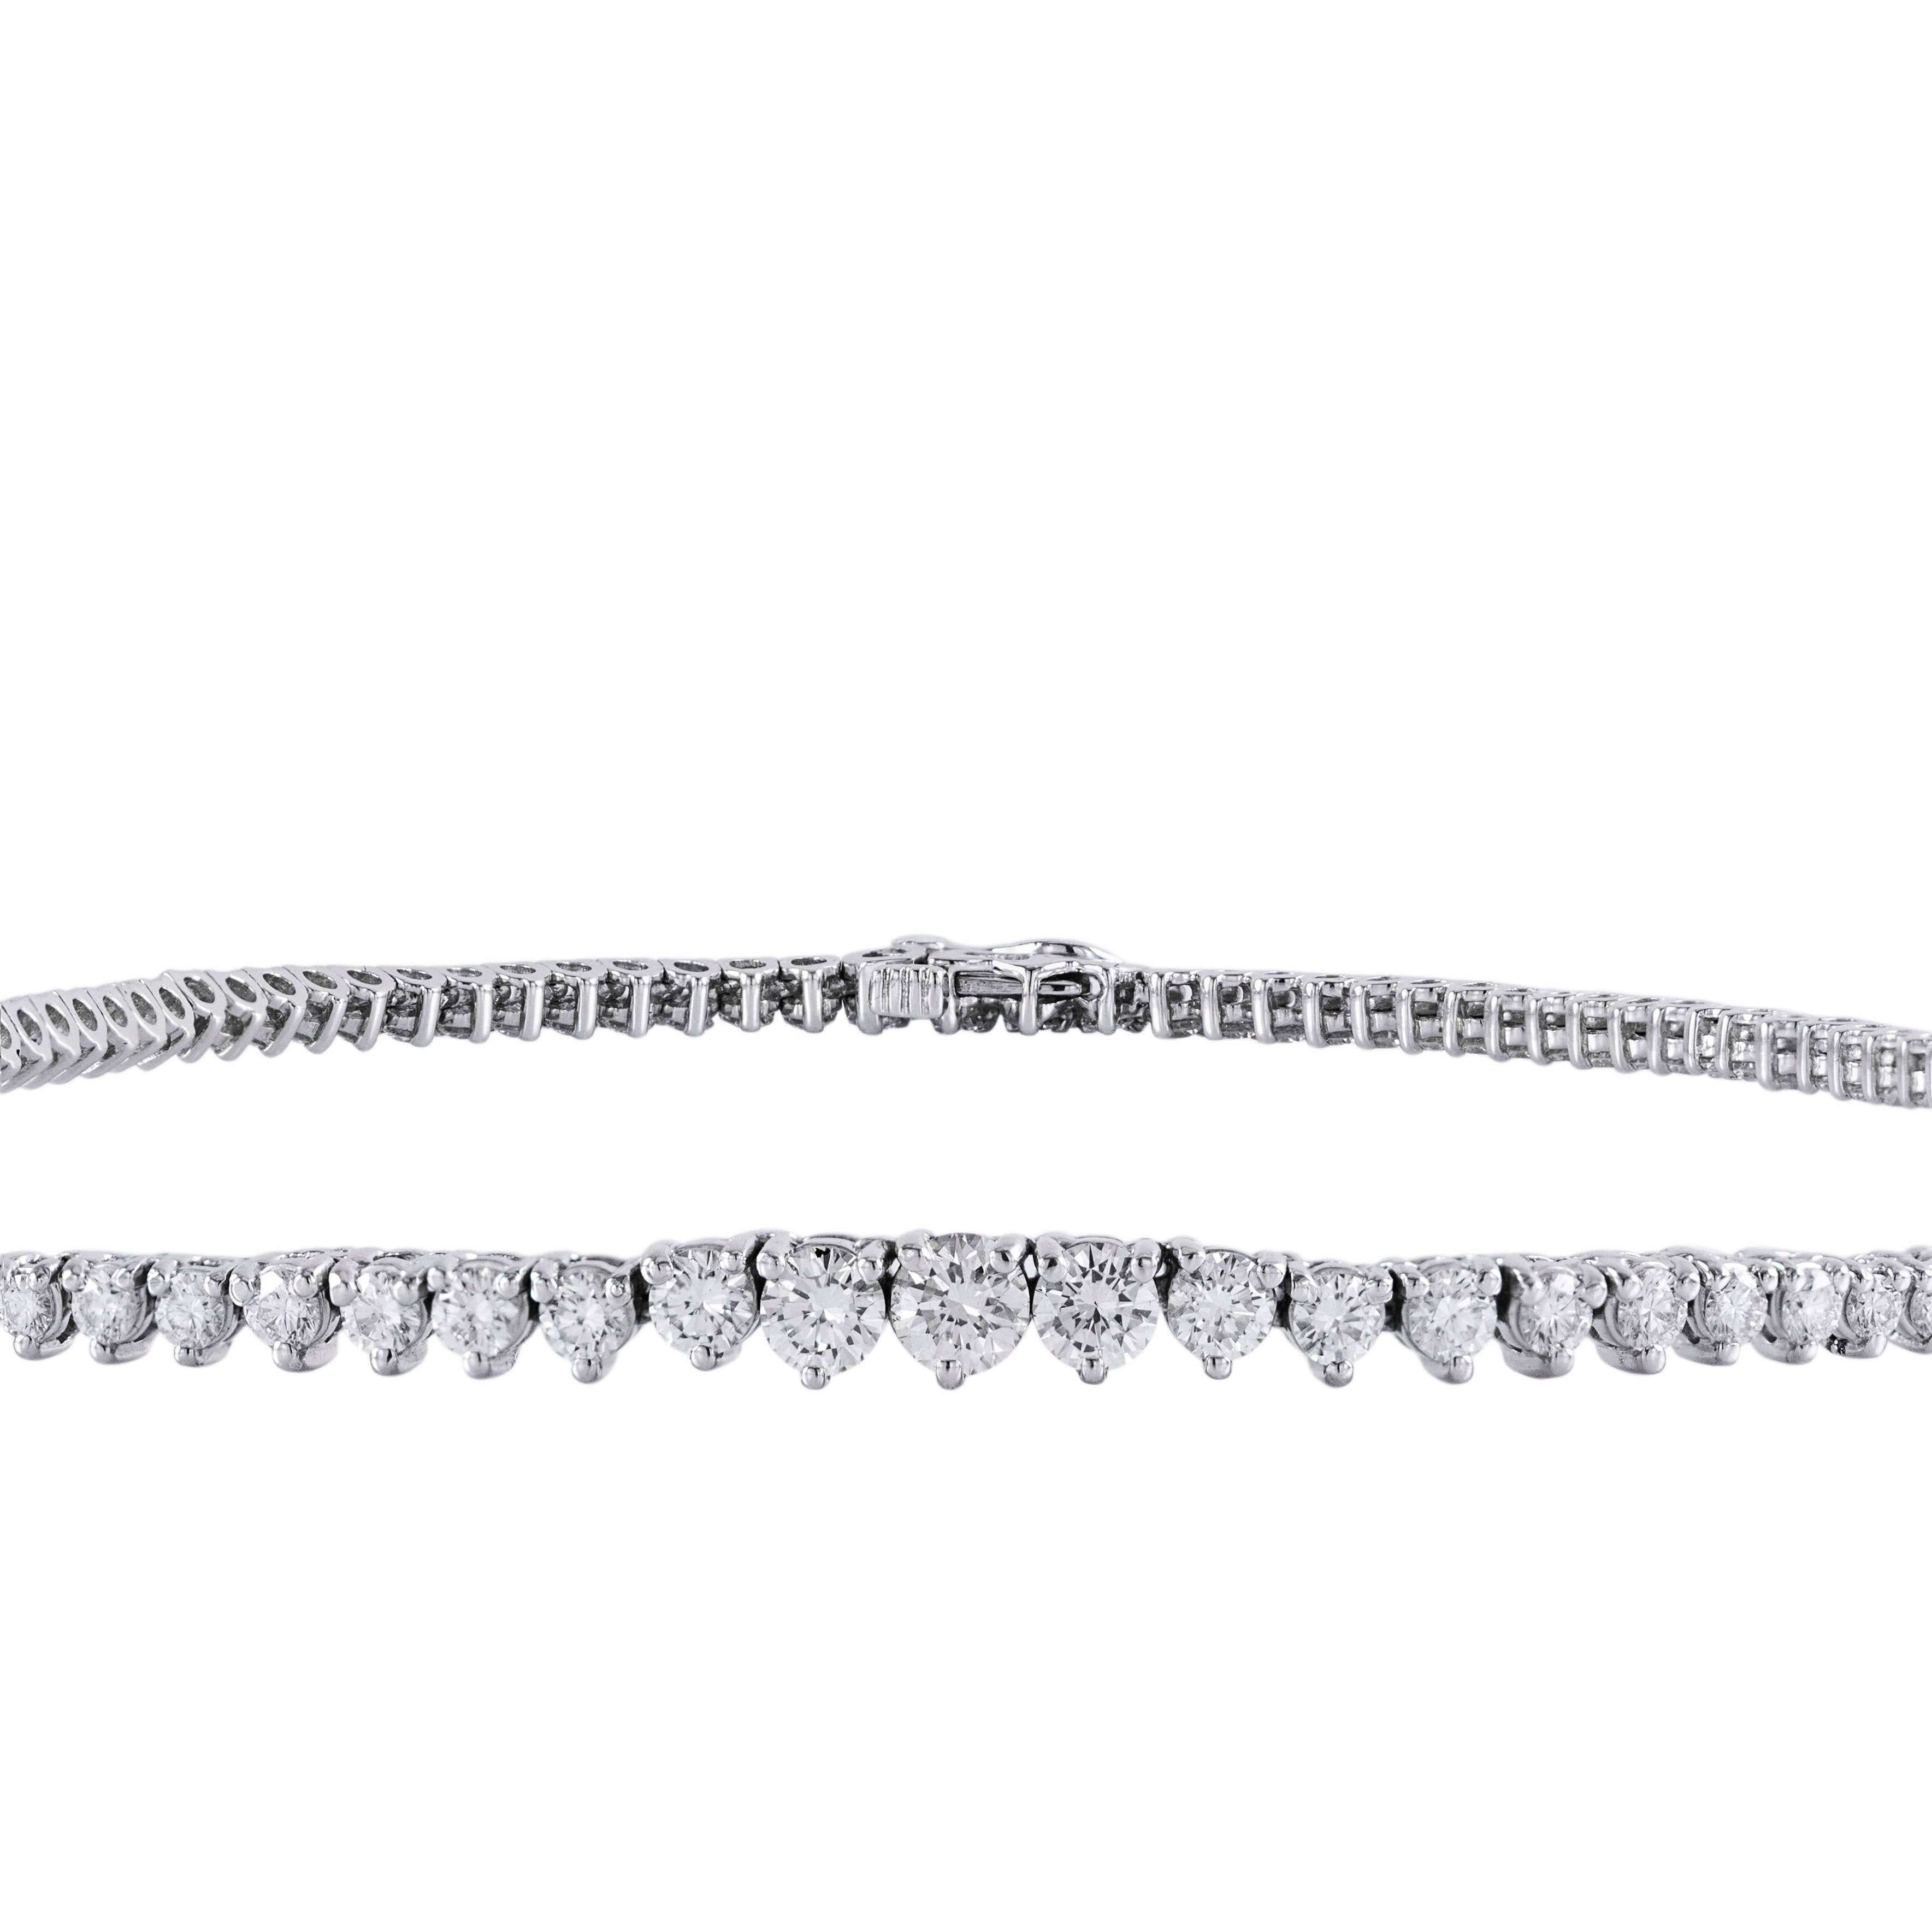 This necklace features 141 round brilliant diamonds set in a three prong setting that graduate bigger as it gets to the center. Total weight of the diamonds is 7.15 carats. Made in platinum. 